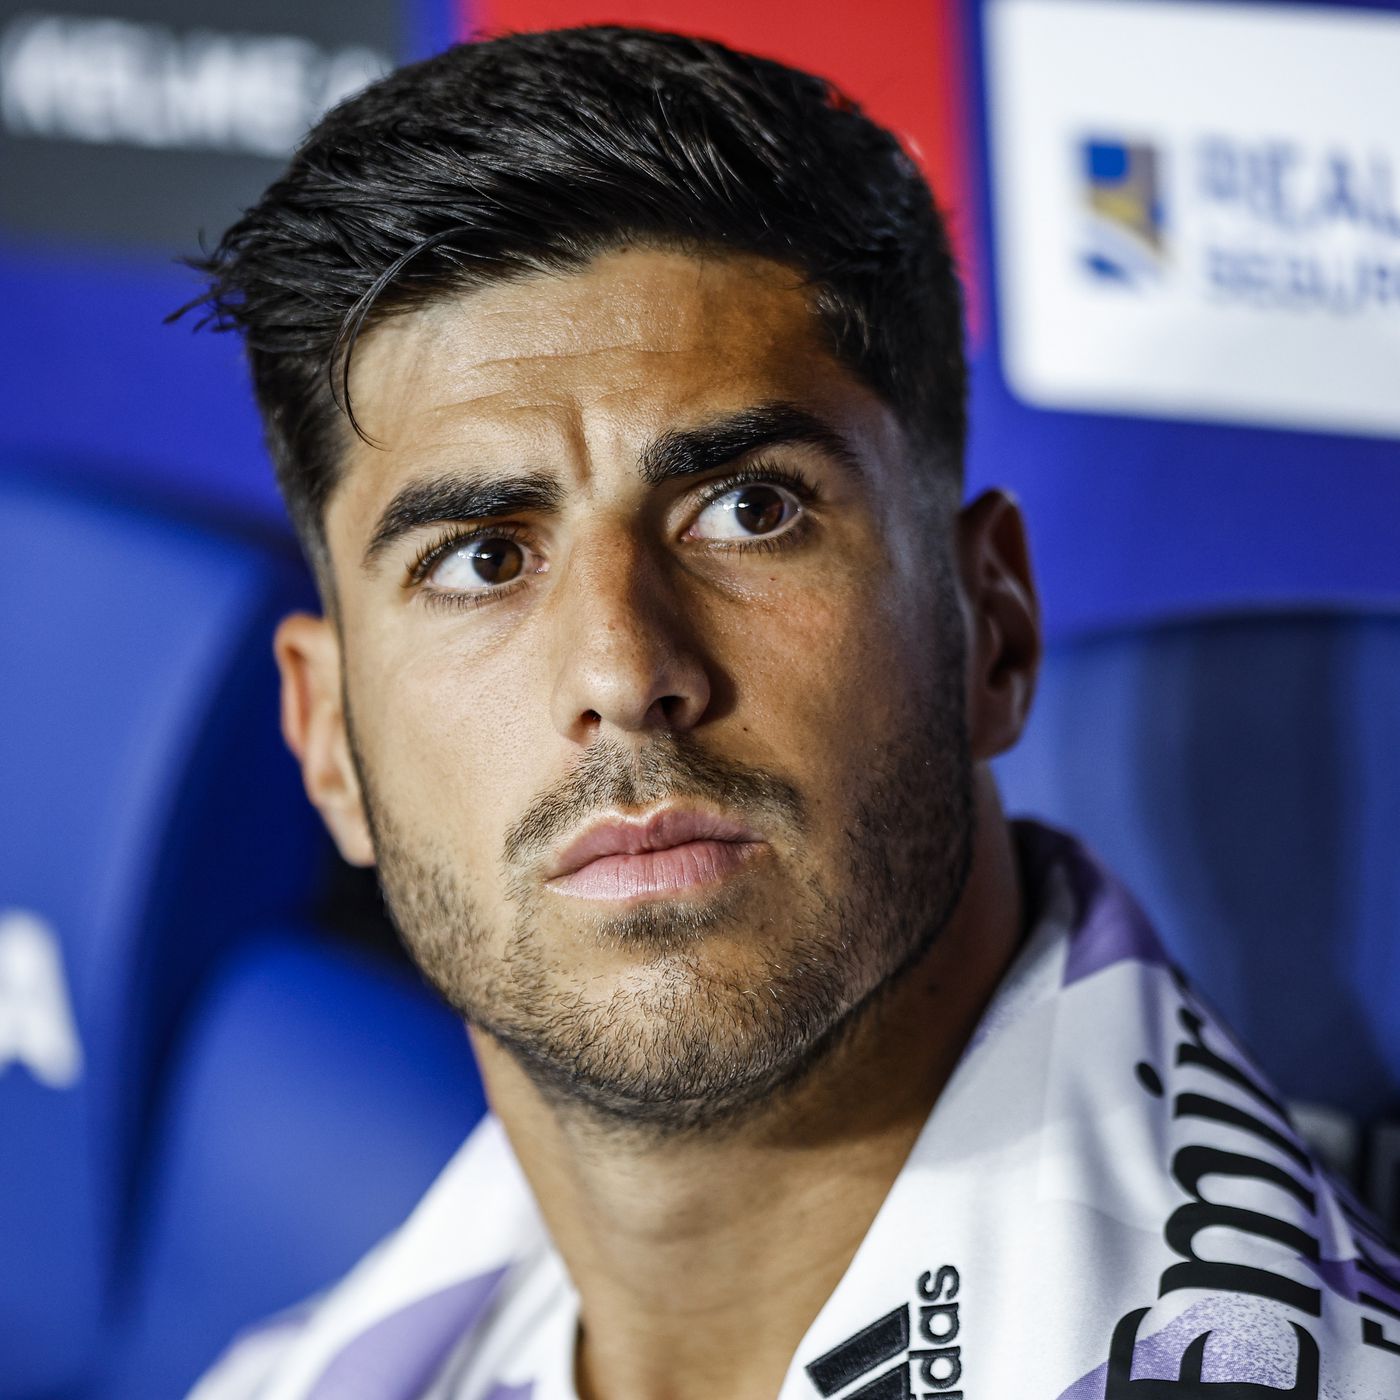 Asensio decides to stay at Real Madrid -report - Managing Madrid